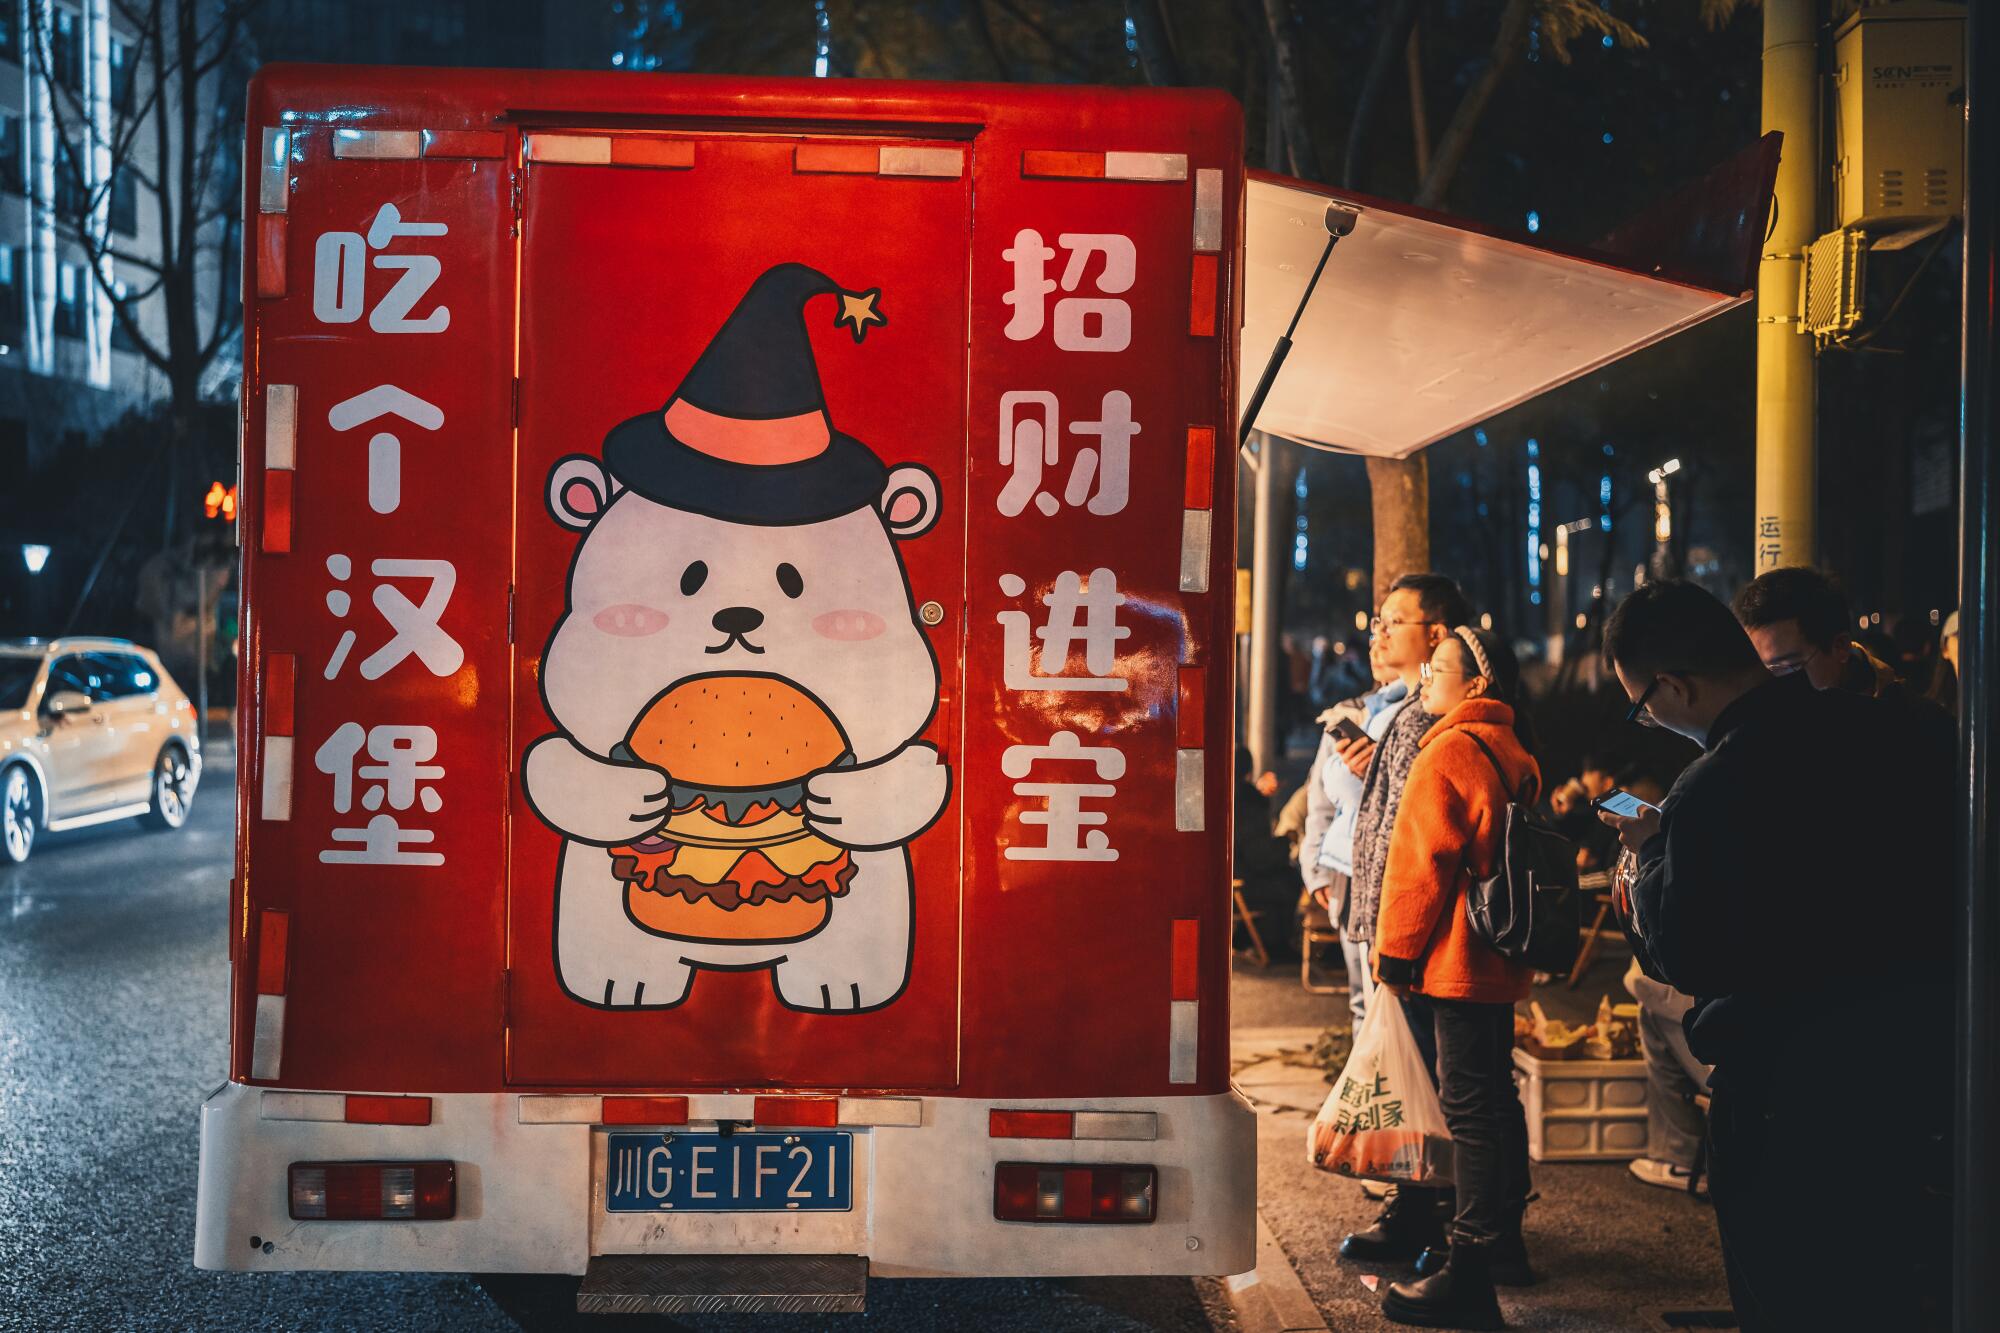 Food truck at a Chinese night market